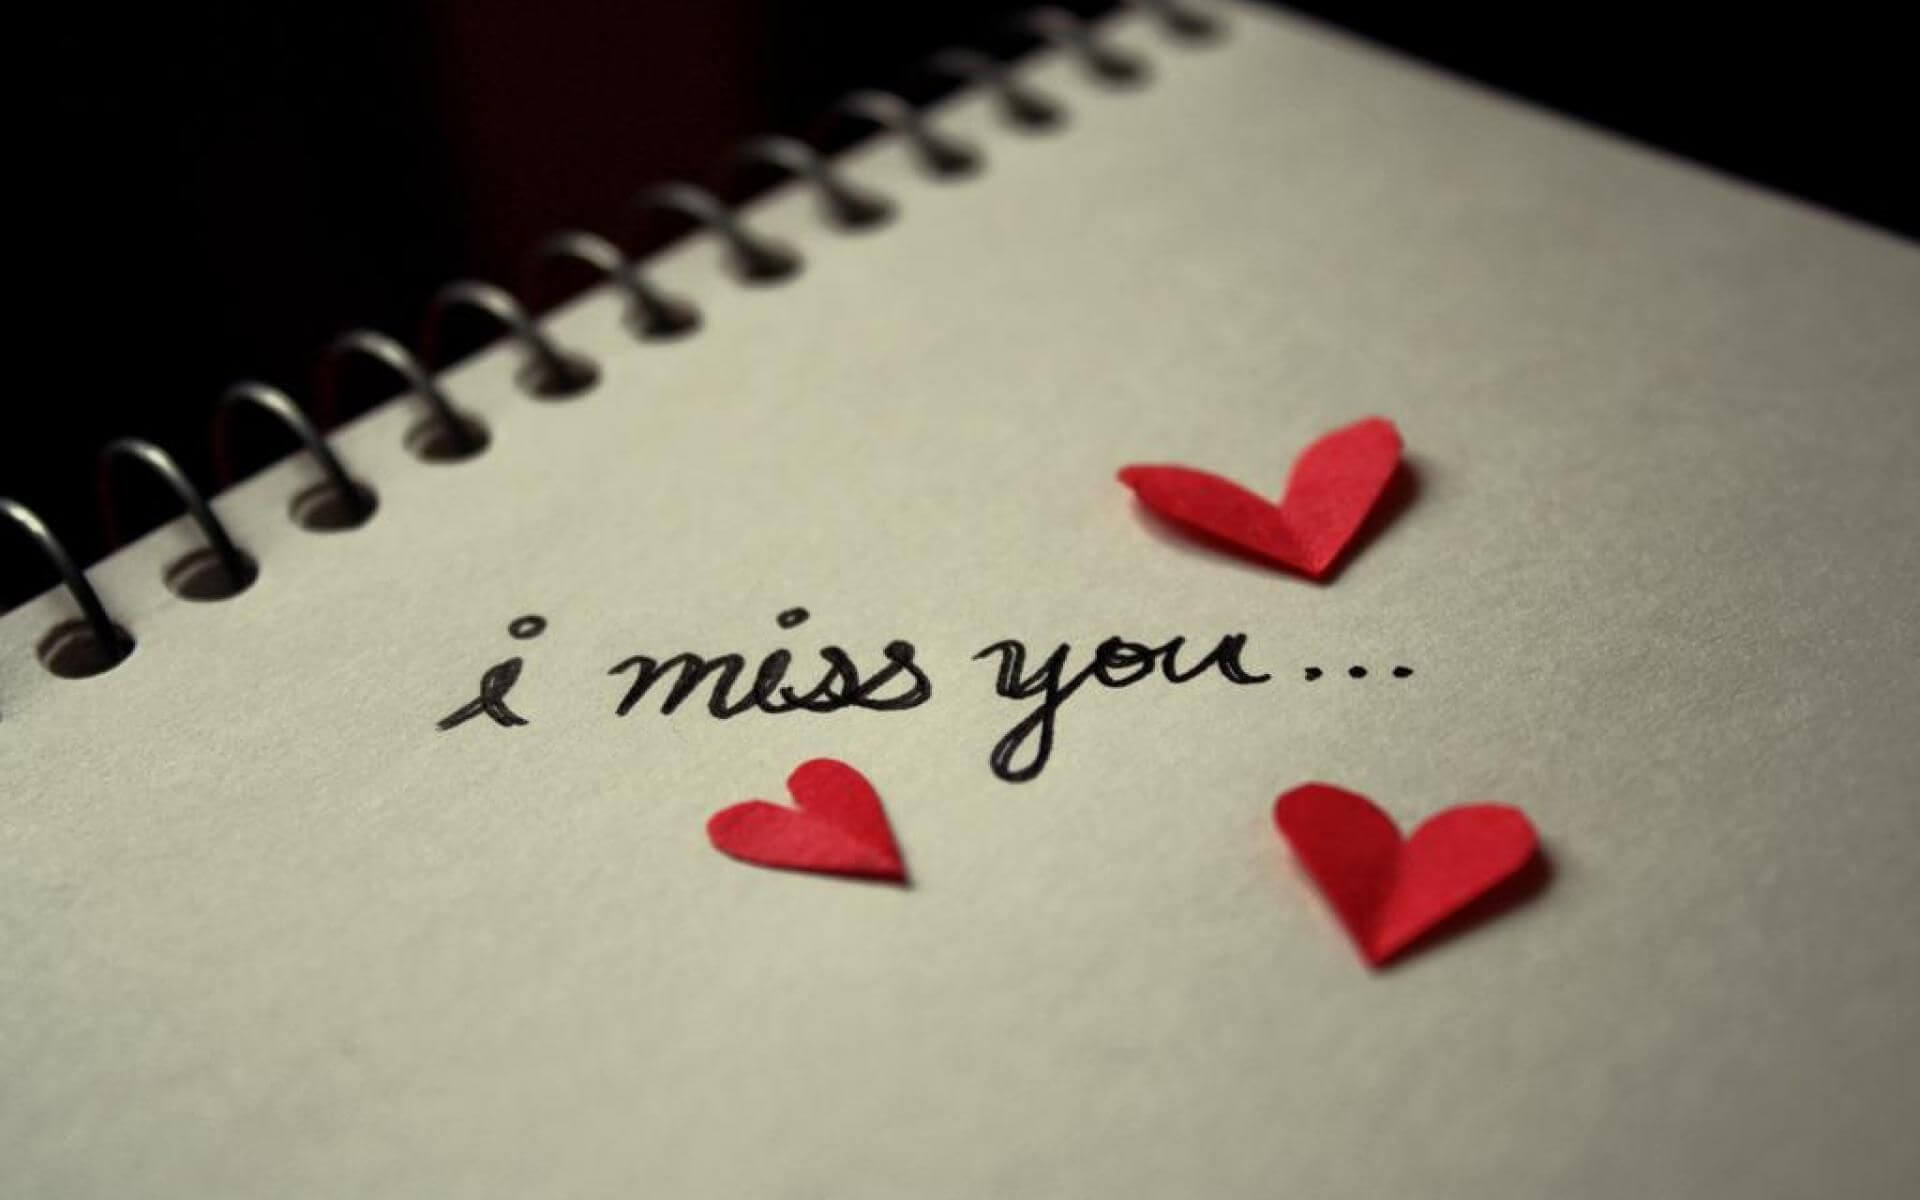 I miss you Heart image free